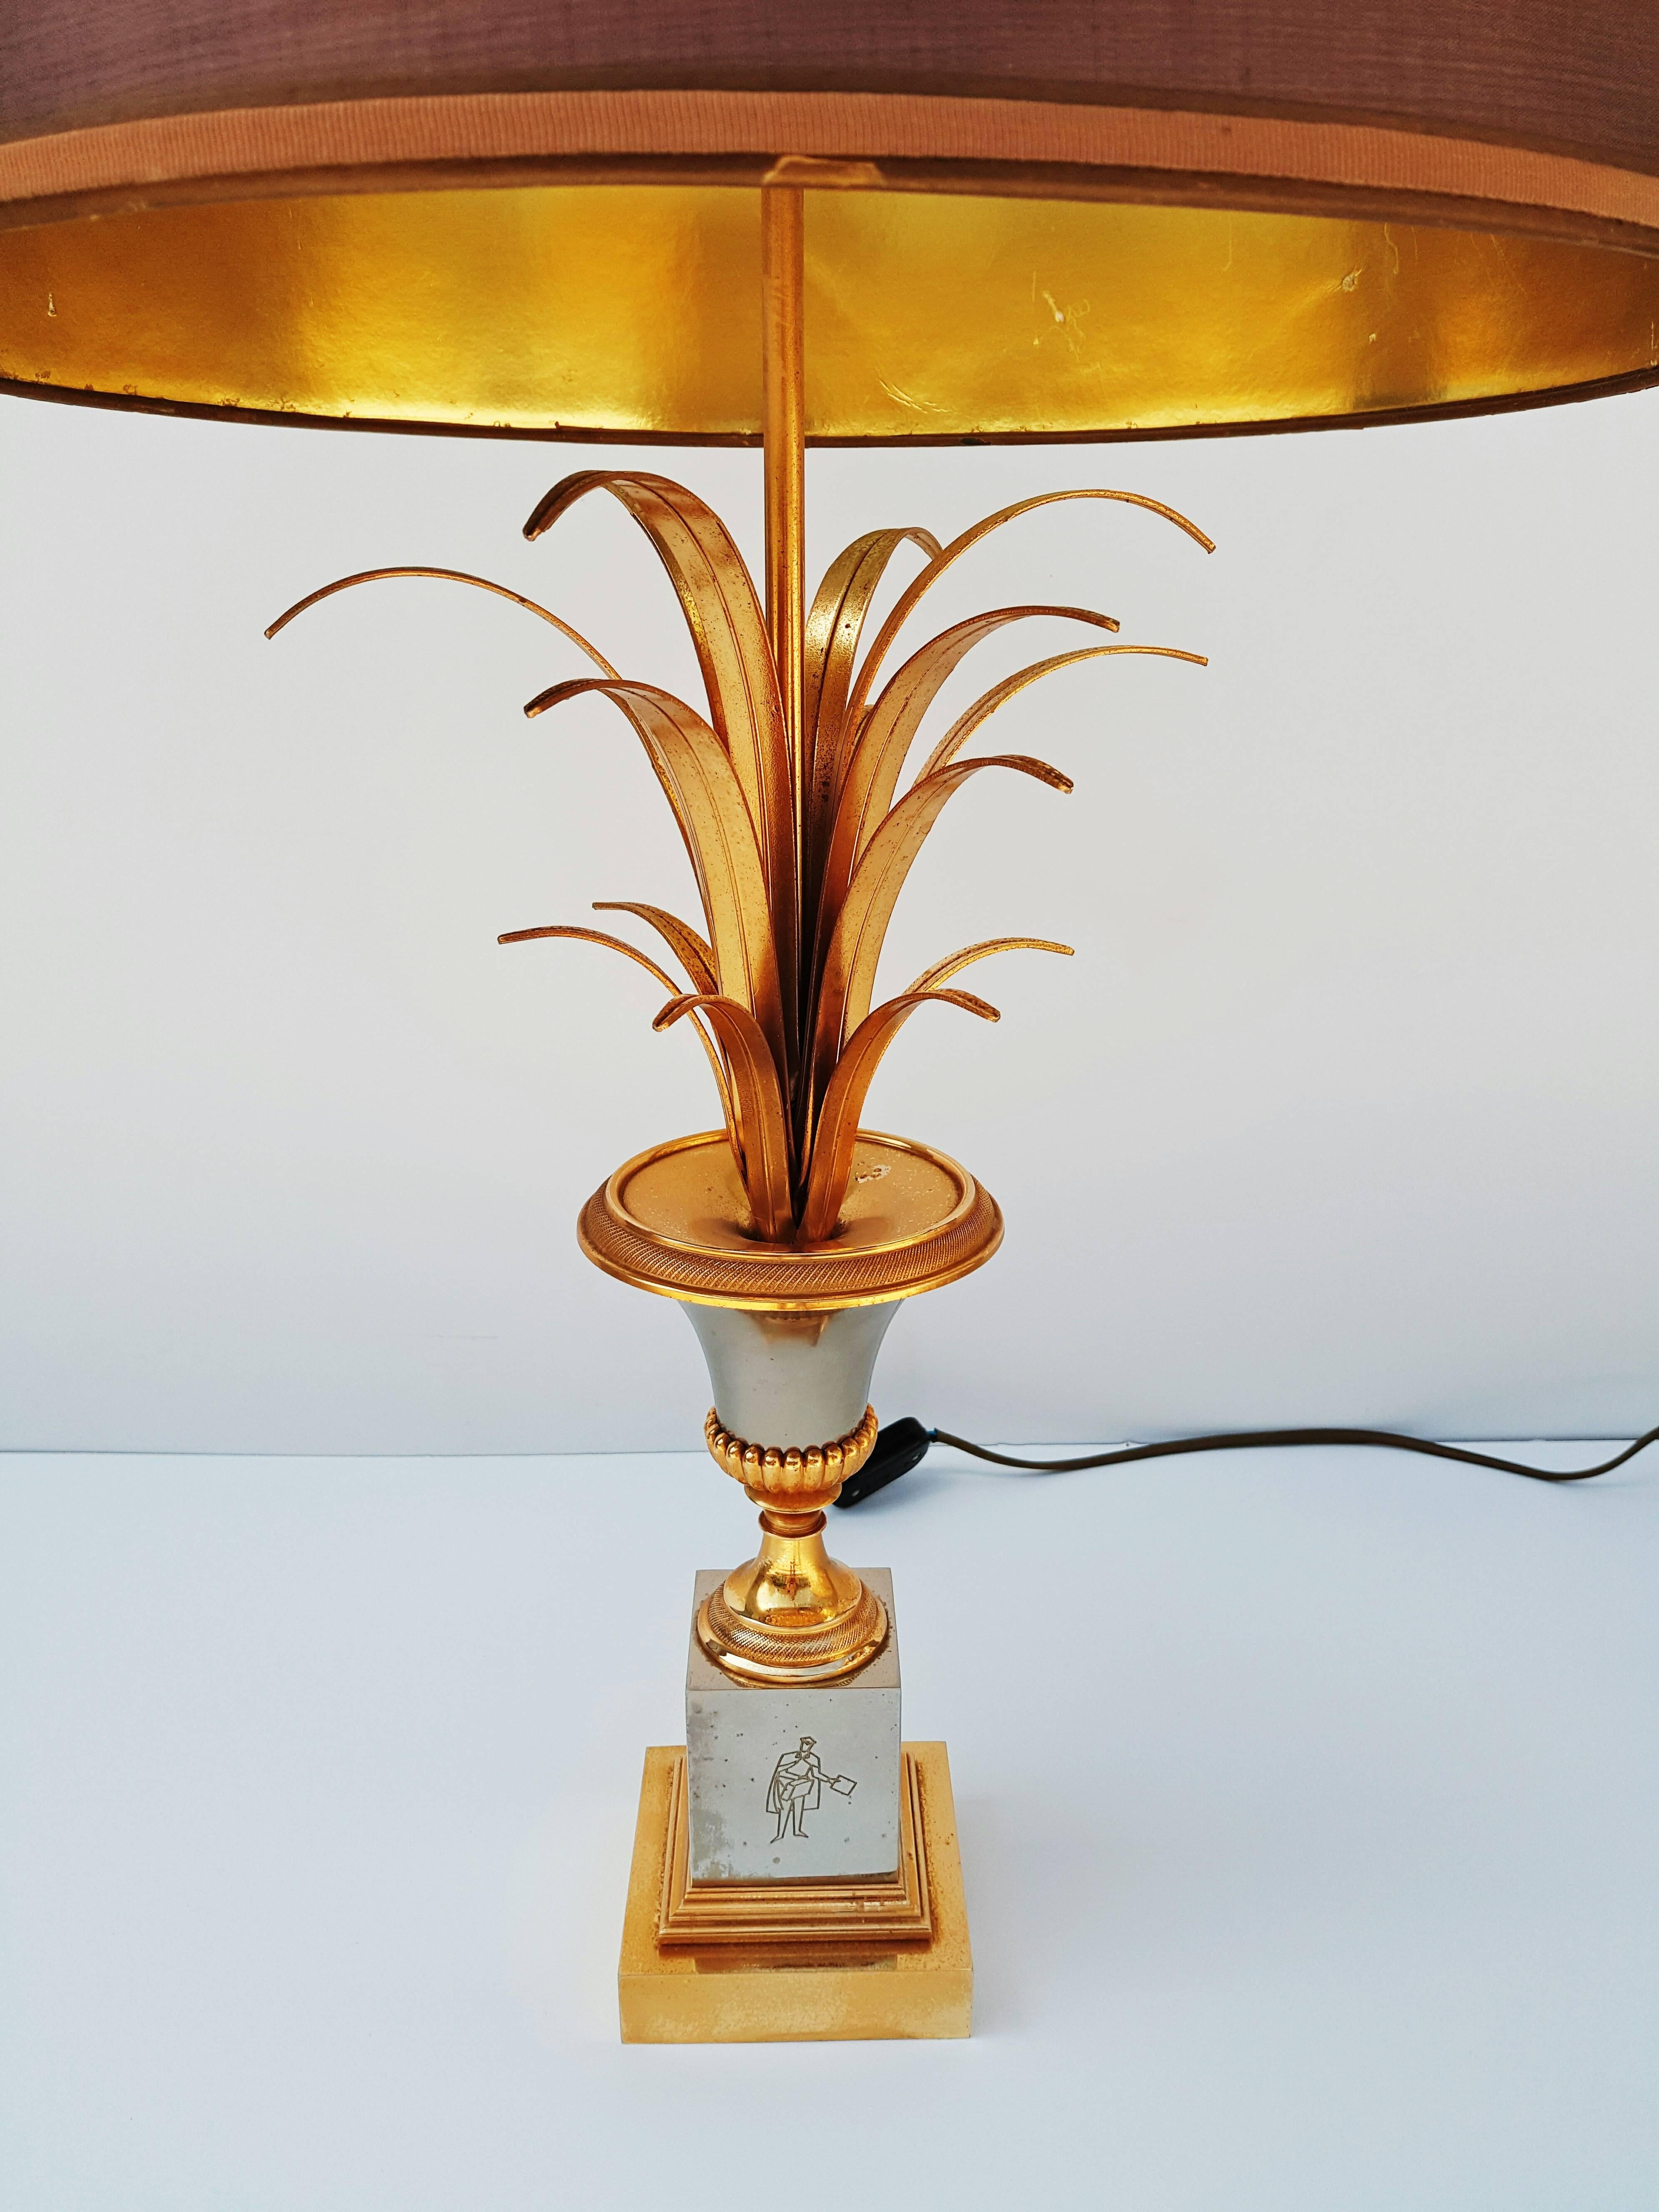 Maison Charles and Fils bronze trophy lamp with wheat detail and acorn finial. Original painted metal shades include.
Designed by Emile-Albert Charles and his two sons, Jean et Jacques. They developed the "Charles style" in the 1960s, a